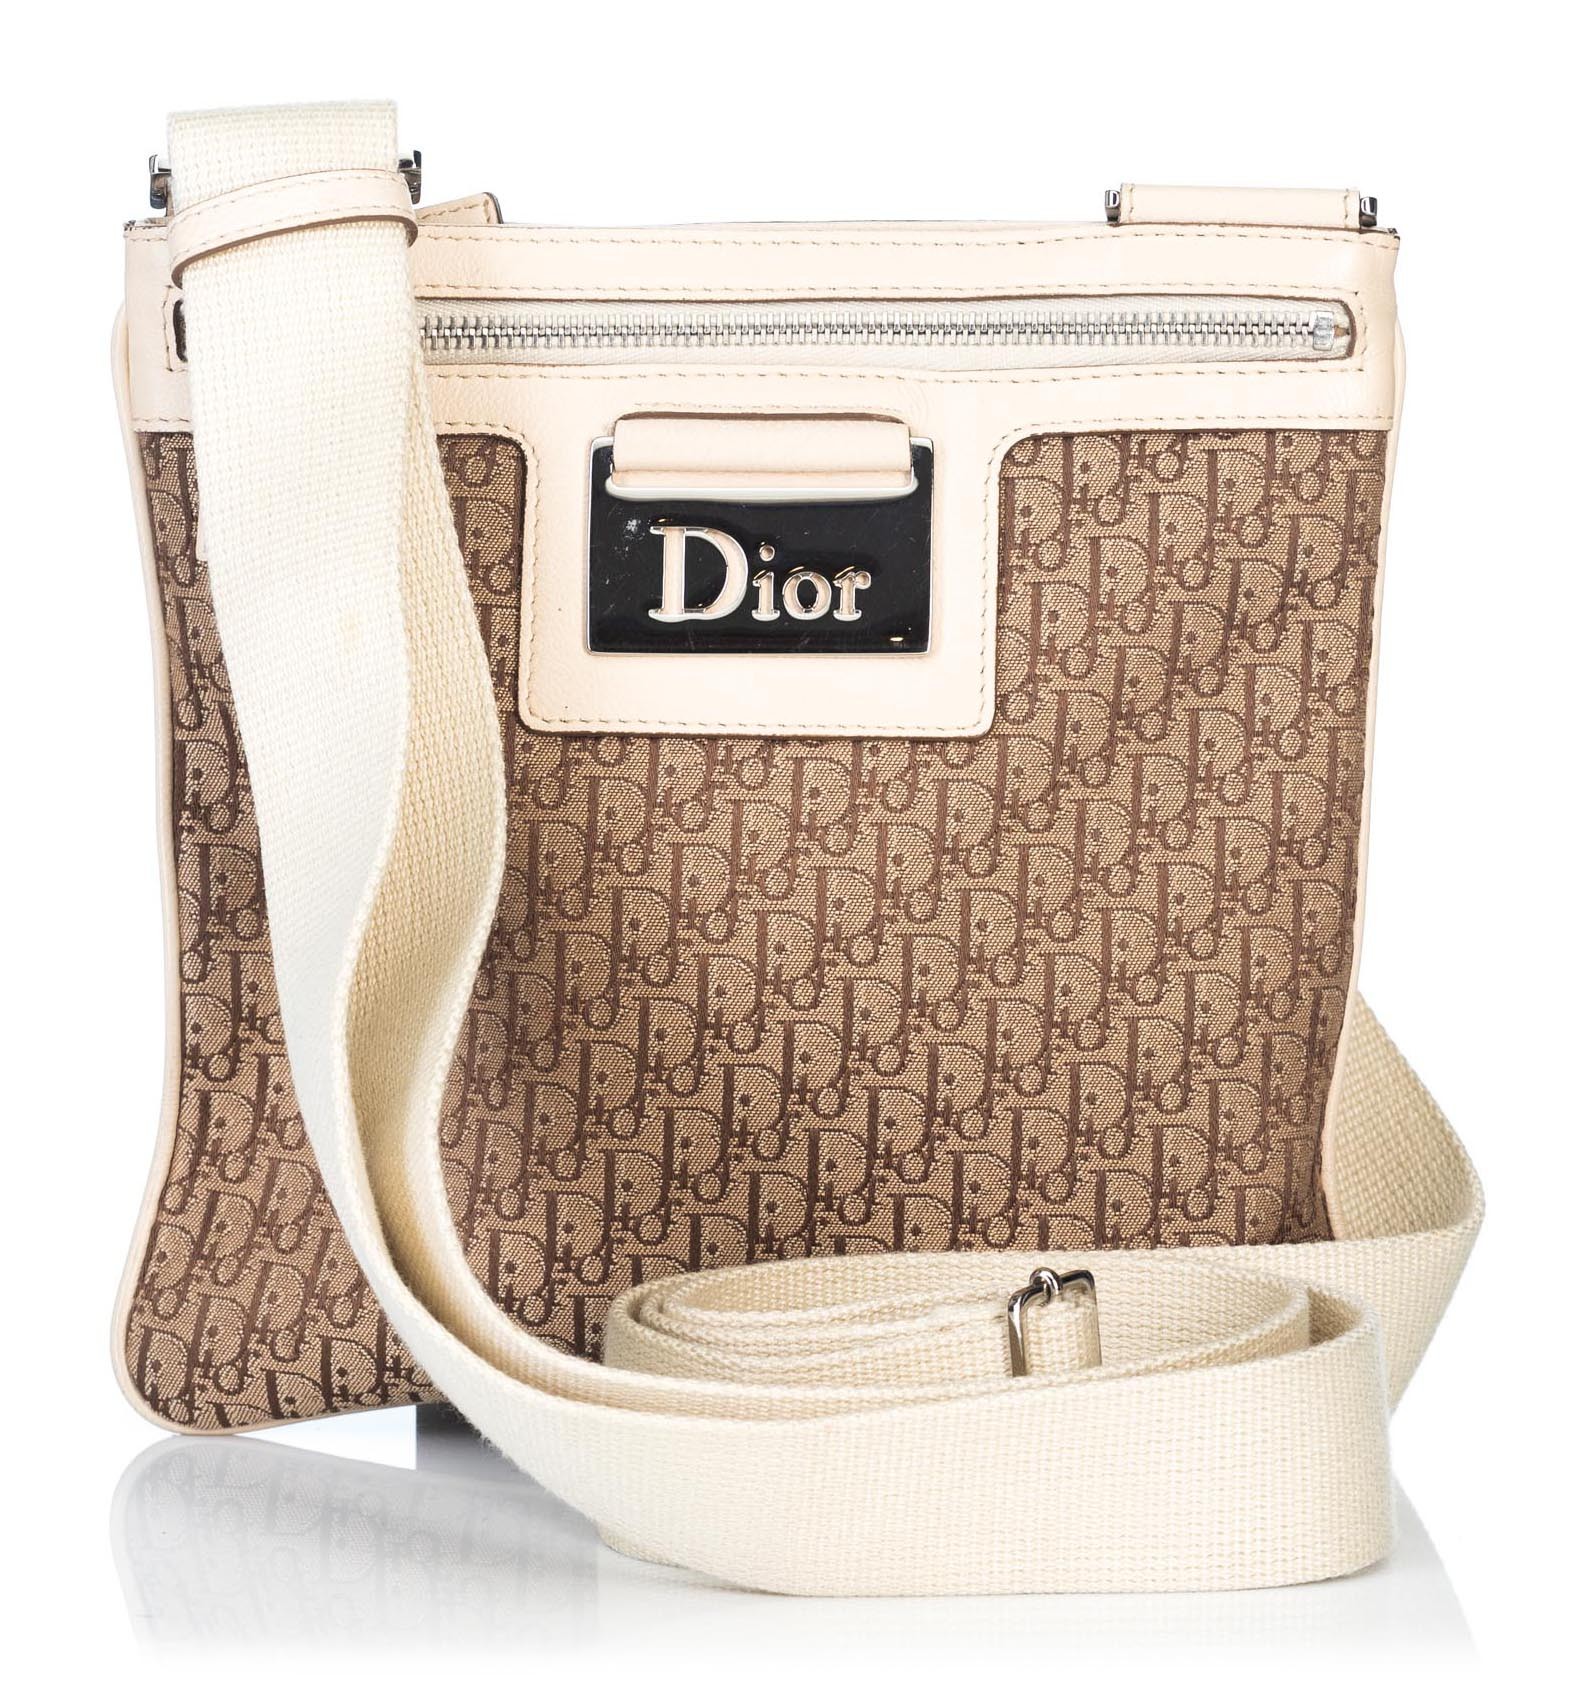 CHRISTIAN DIOR. Bag, Speedy, jacquard fabric and leather details